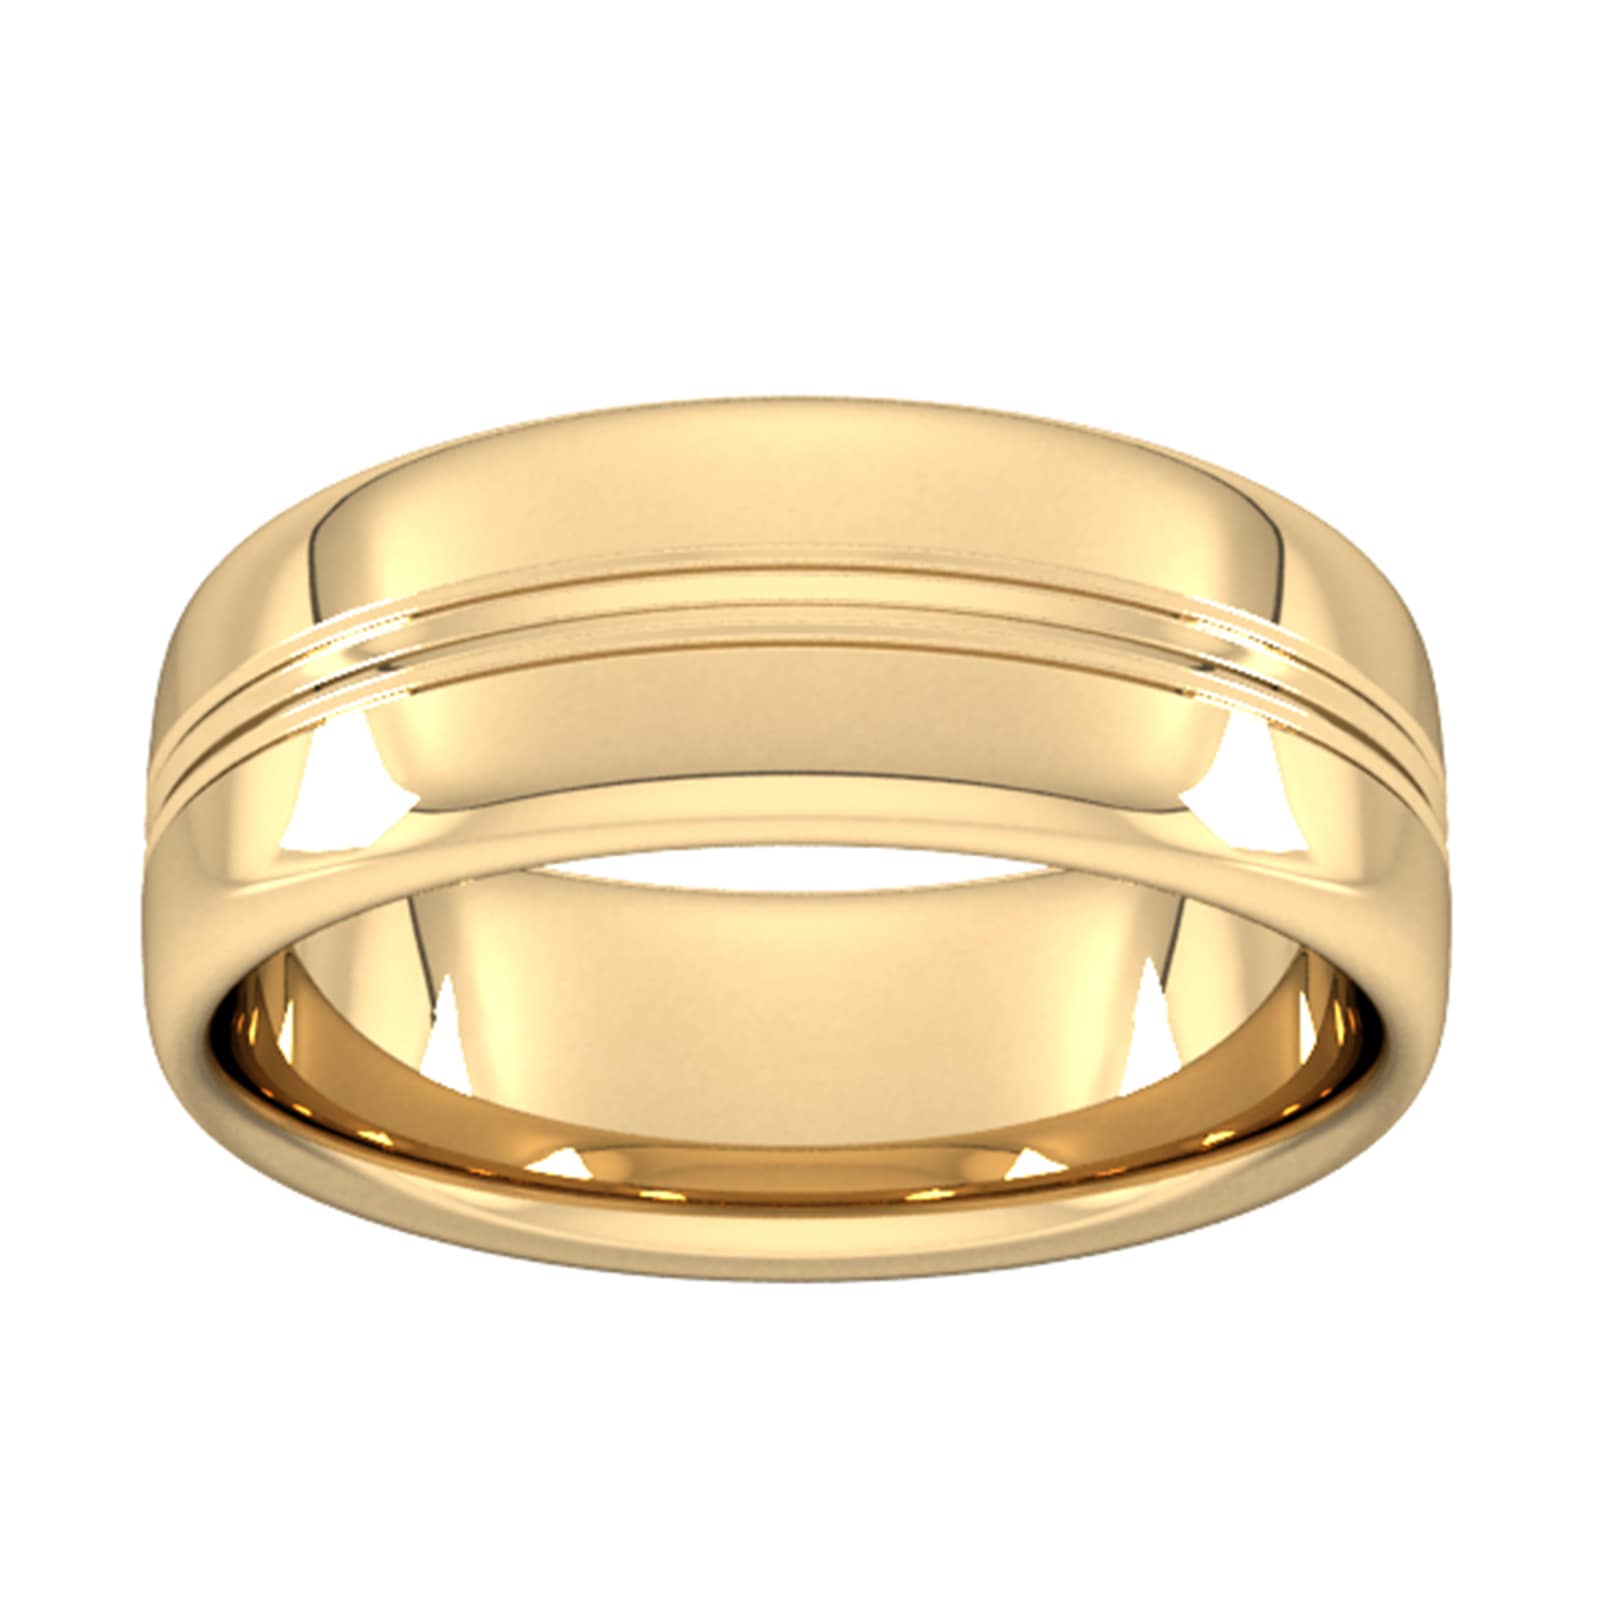 8mm Slight Court Extra Heavy Grooved Polished Finish Wedding Ring In 18 Carat Yellow Gold - Ring Size U